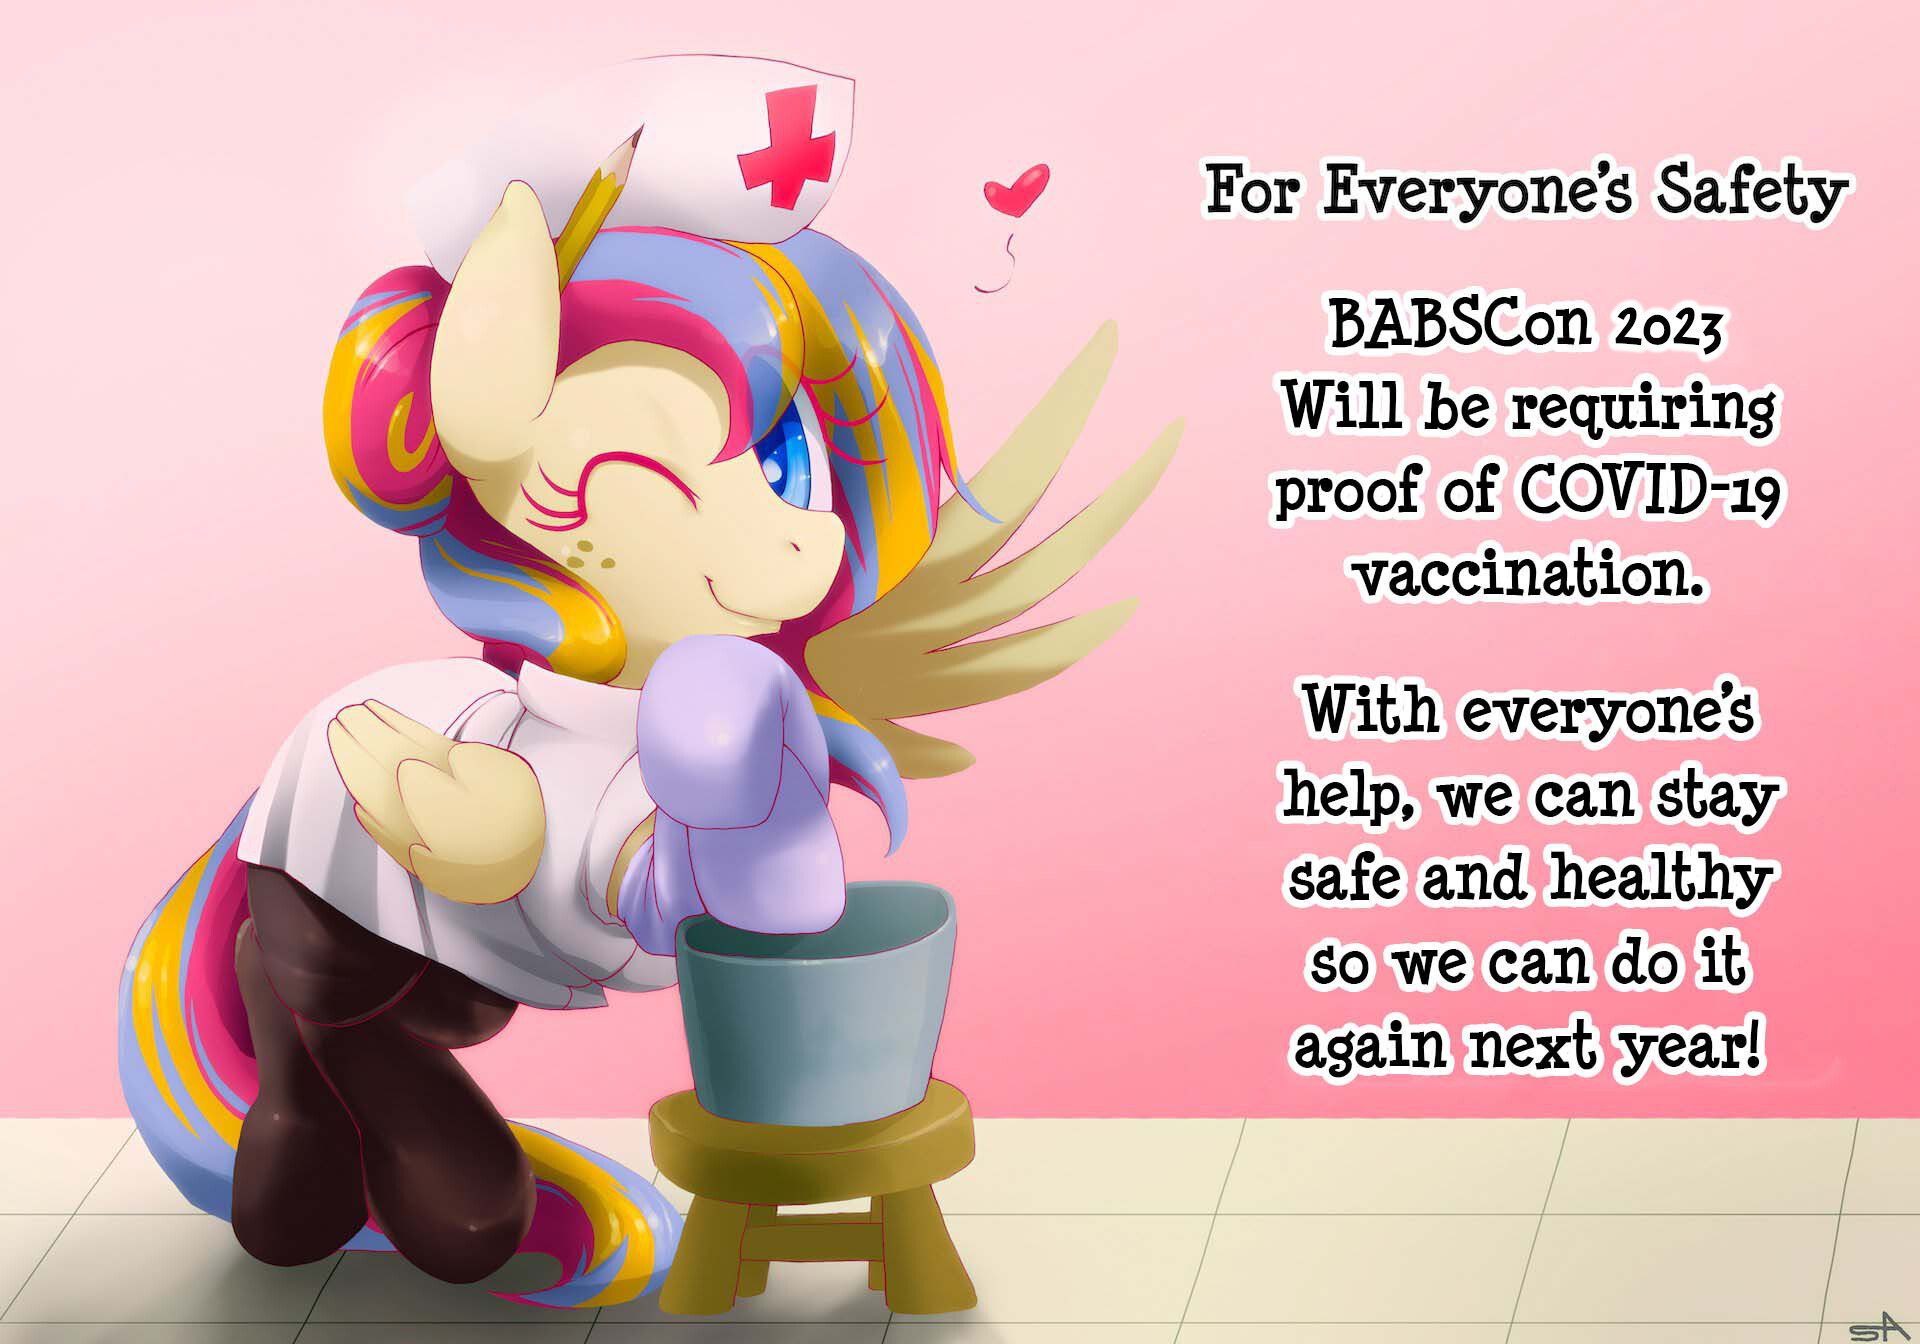 BABSCon 2023: Proof of Vaccination Required to Keep Everyone Safe!